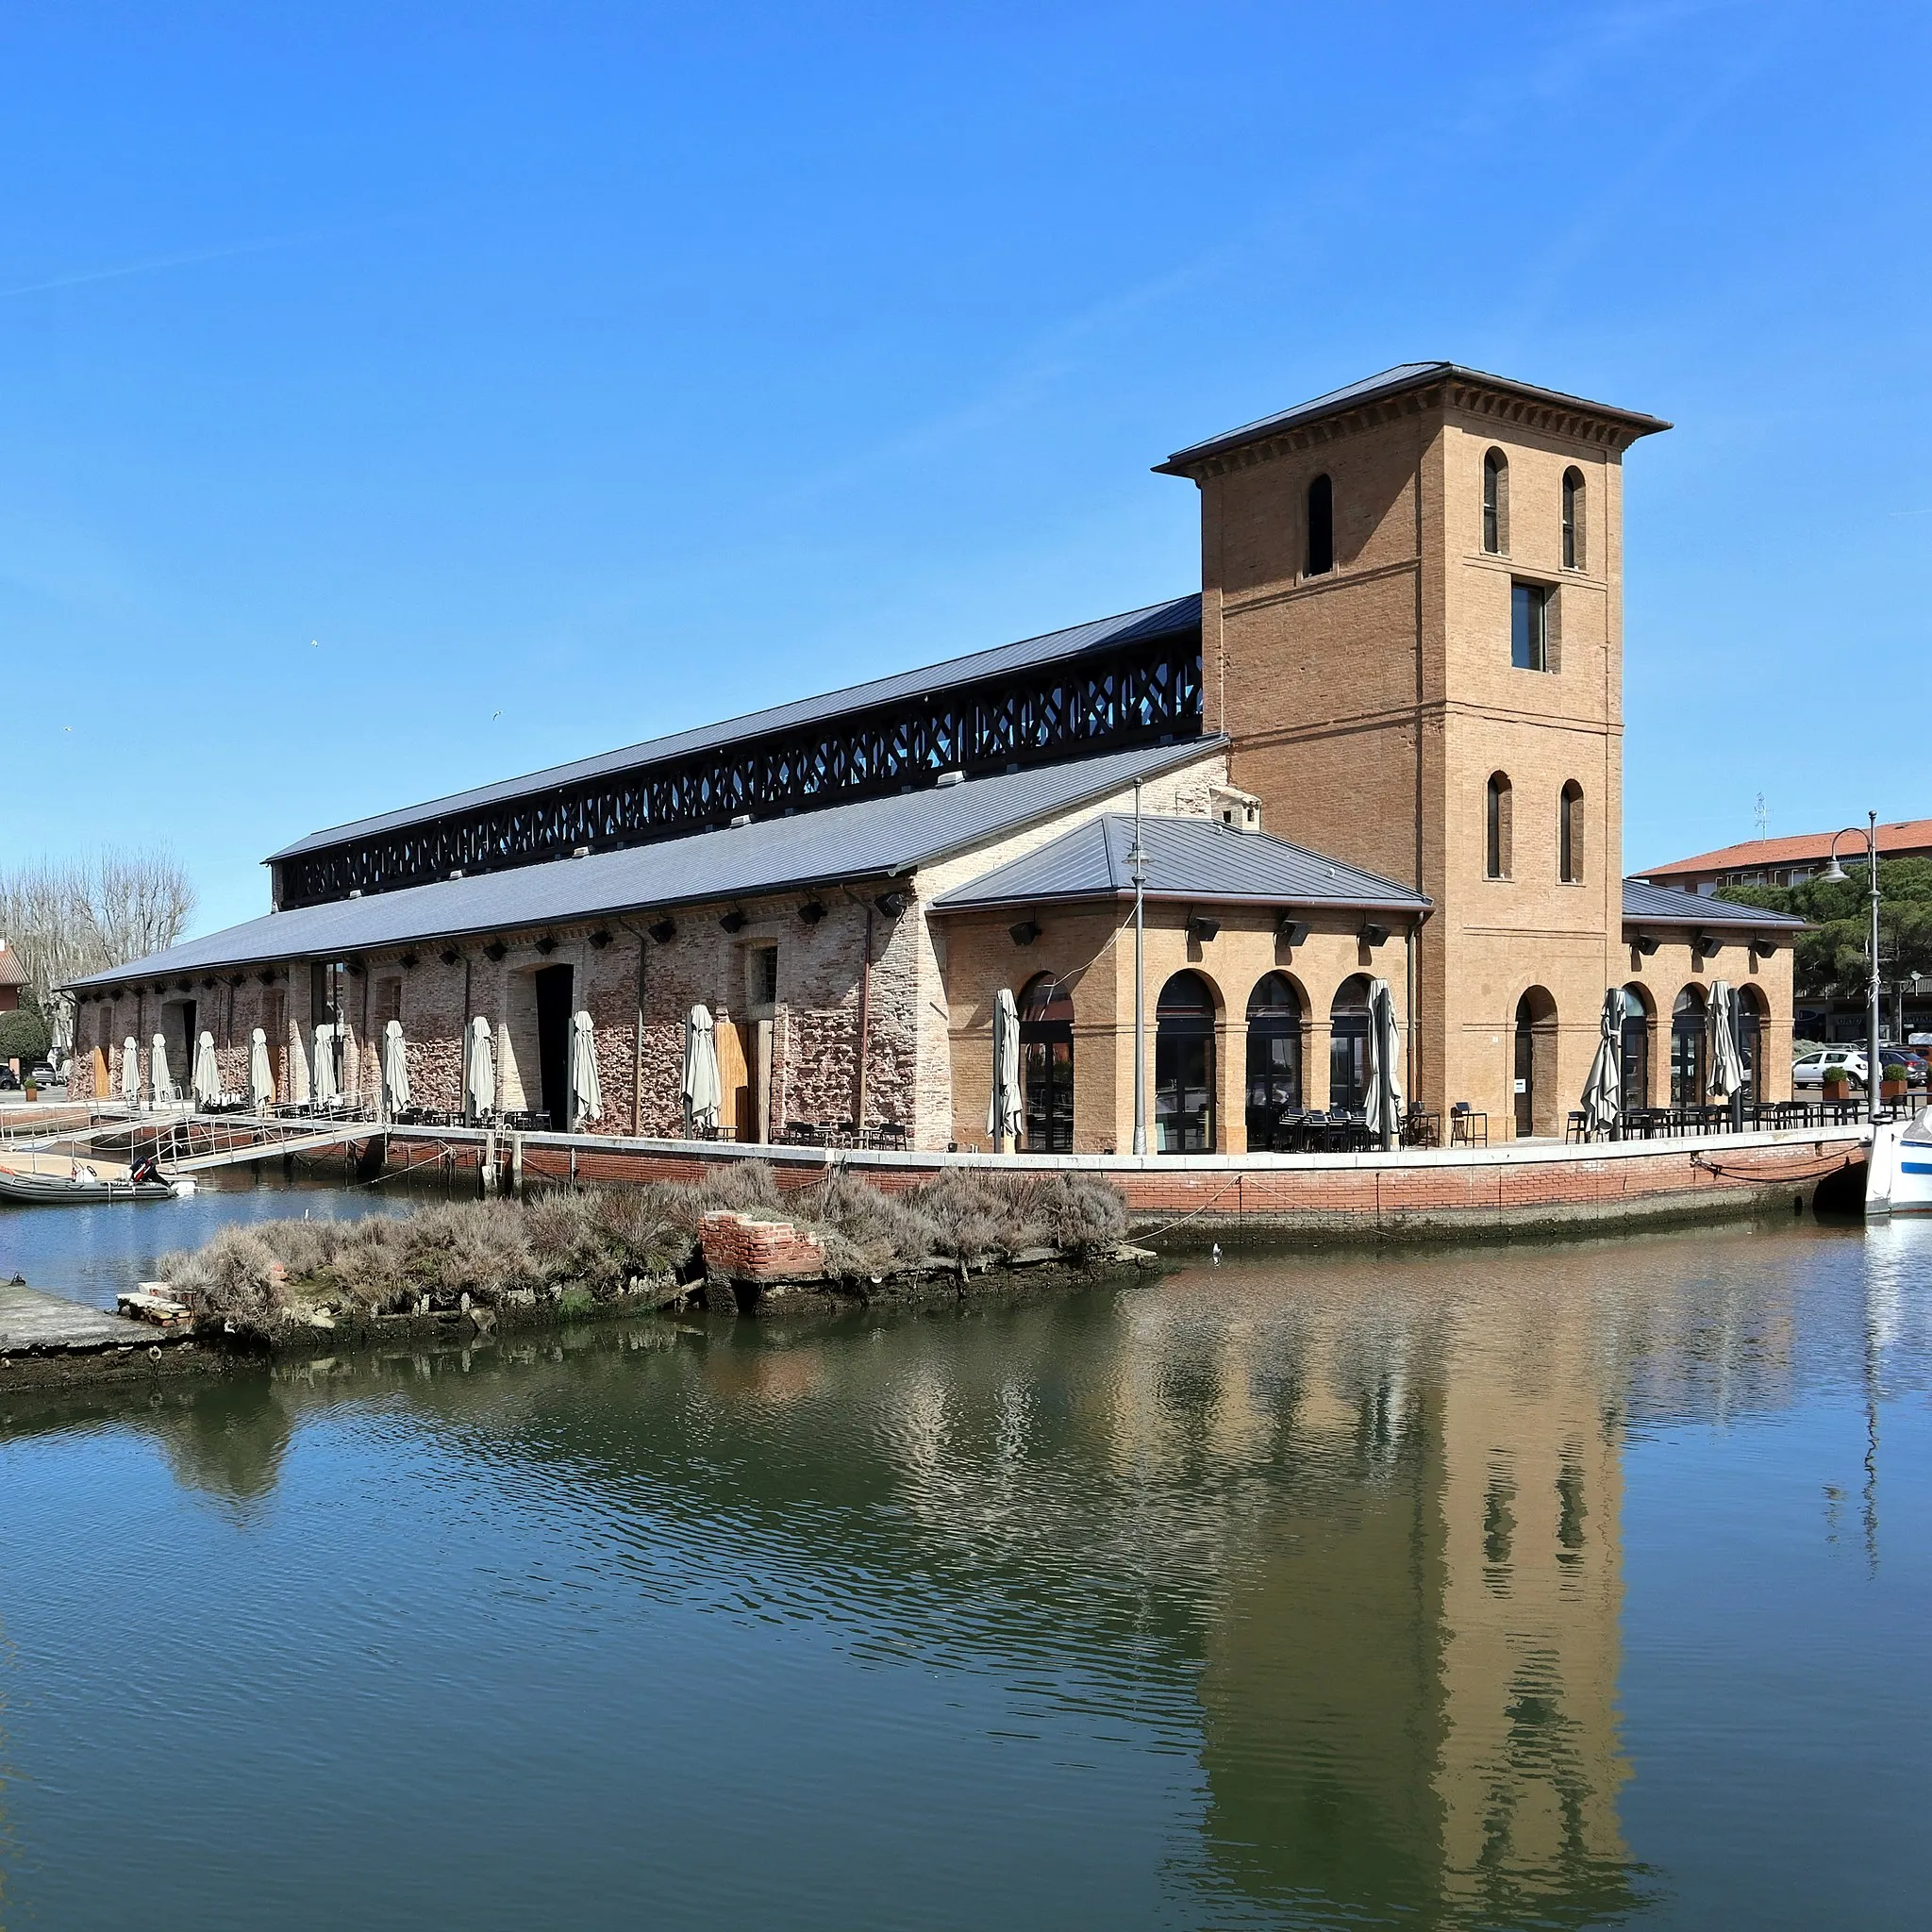 Photo showing: The Darsena Salt Storehouse is a remarkable example of industrial architecture from the 1700s, linked to the local tradition of salt processing, coming from the Cervia salt pans. It is located between the salt pans and the Adriatic Sea, in the historic town centre.